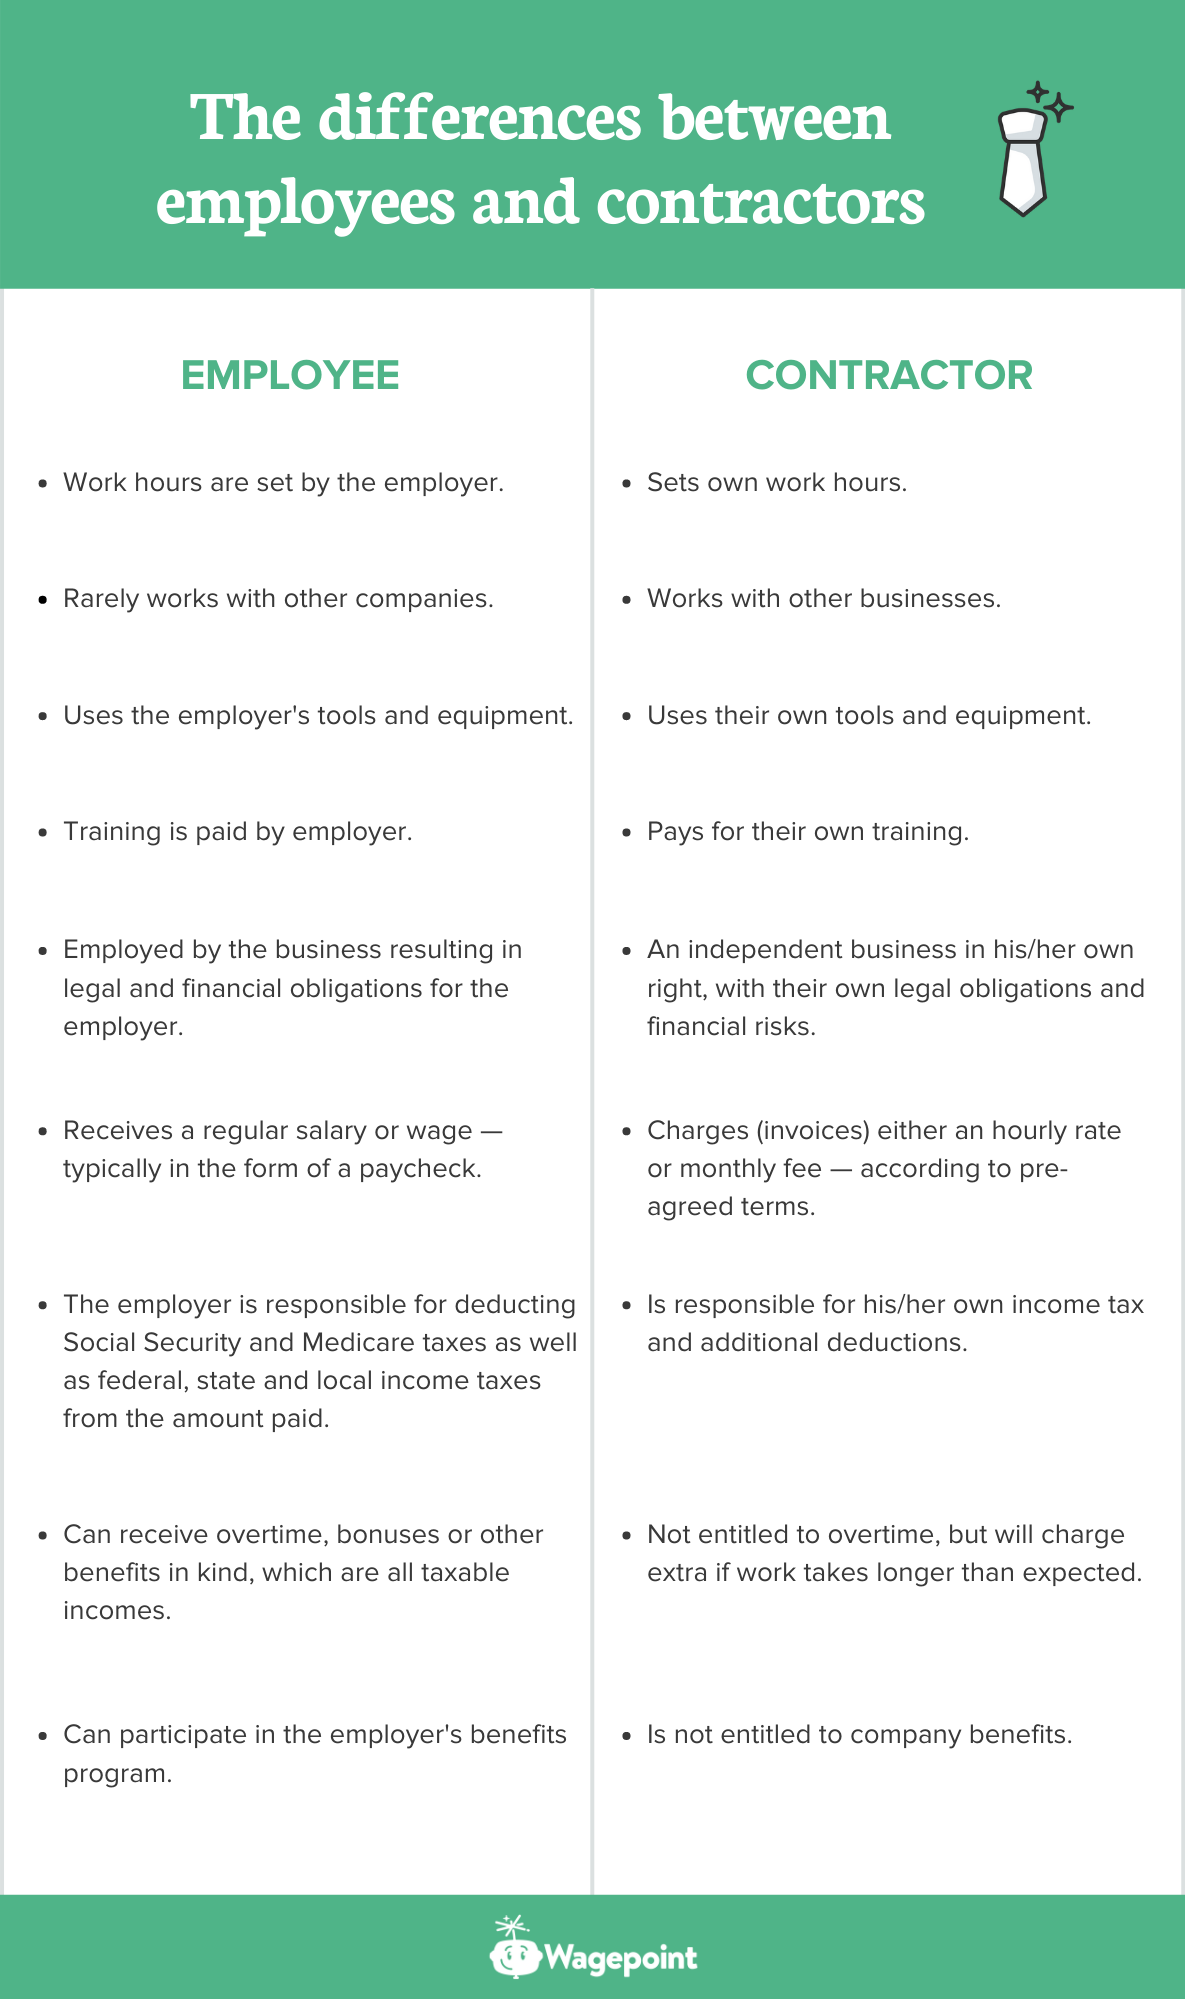 contractors vs employees wagepoint US differences table